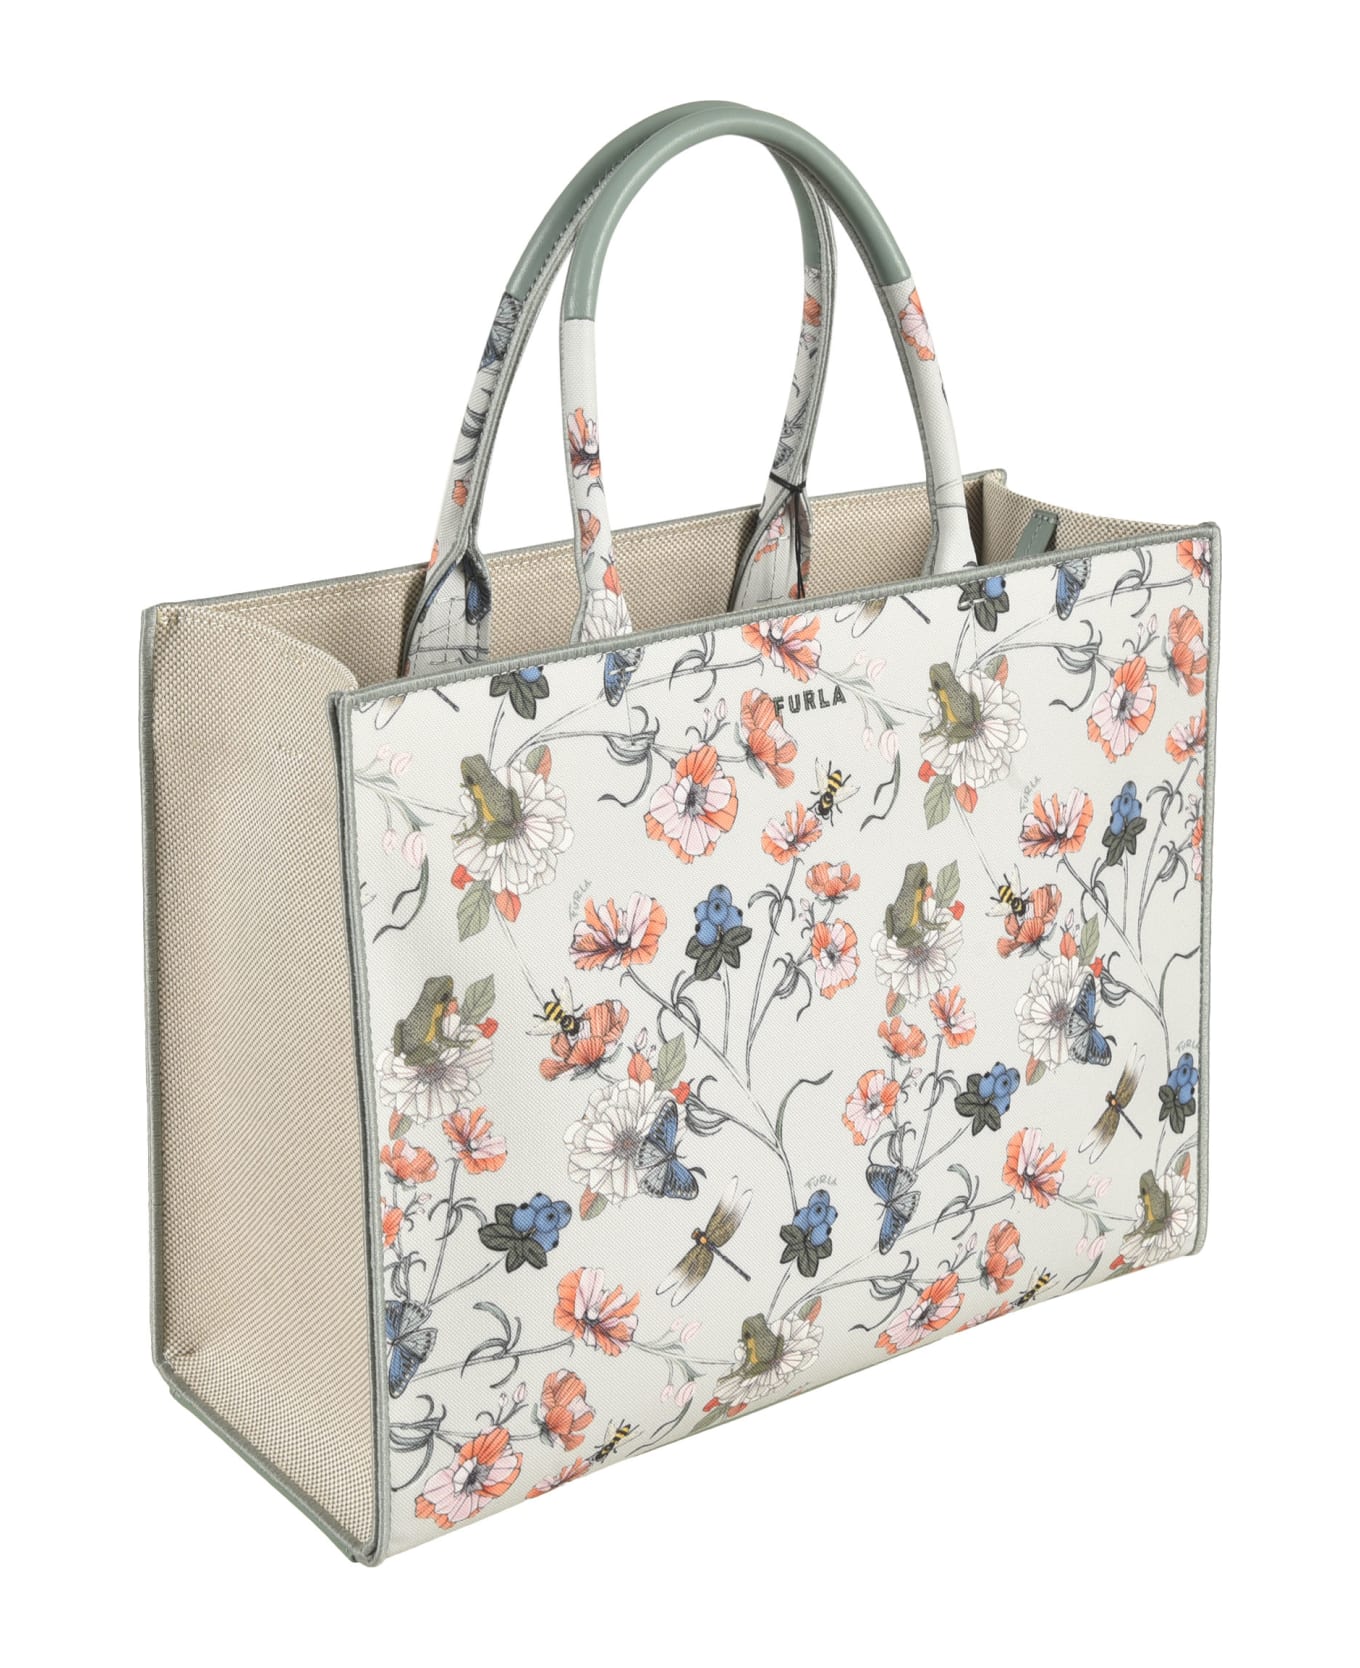 Furla Floral Tote - G3600 トートバッグ